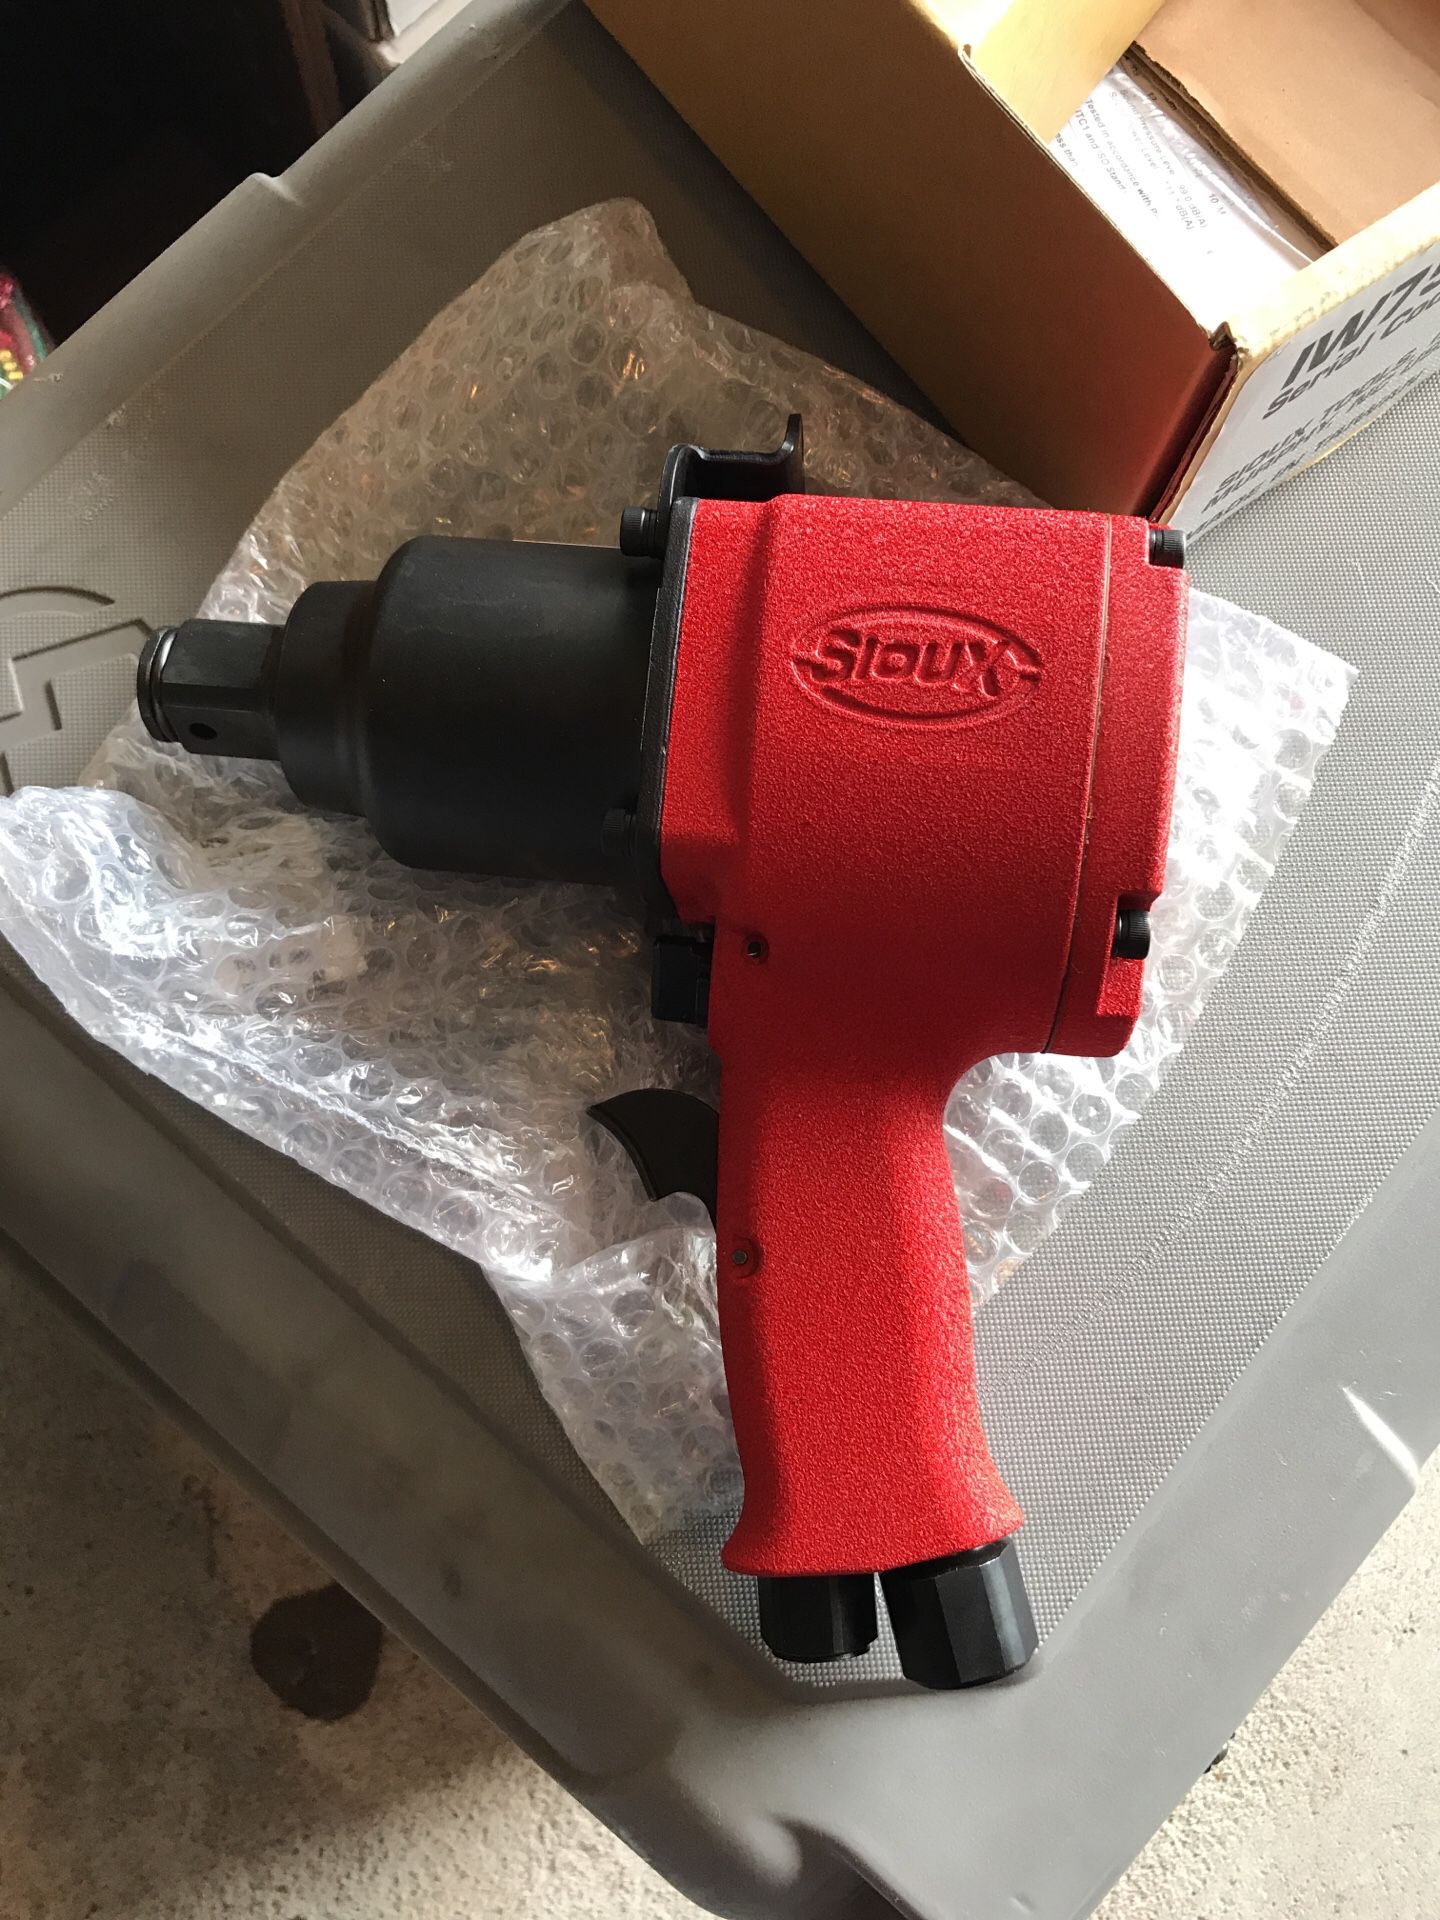 SIOUX-Snap on 1inch impact wrench New heavy duty